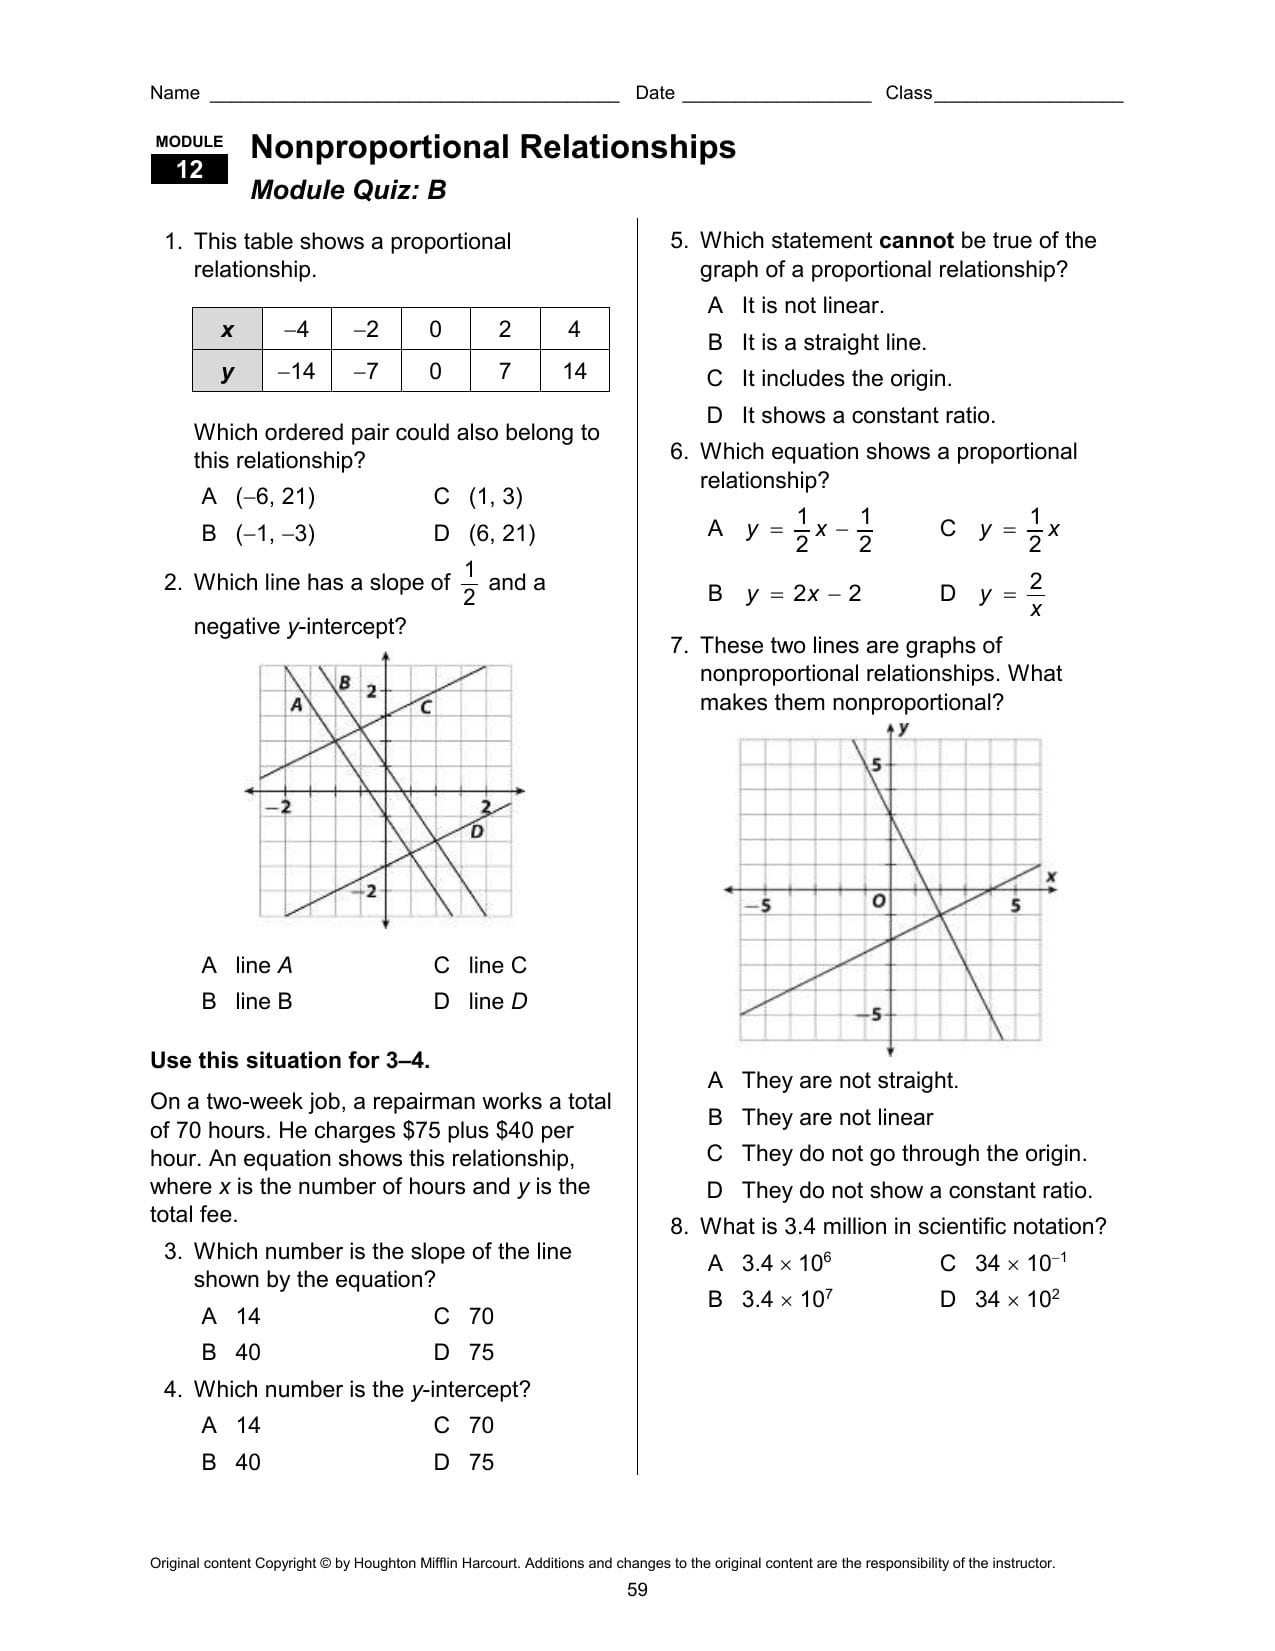 representing-linear-non-proportional-relationships-worksheet-images